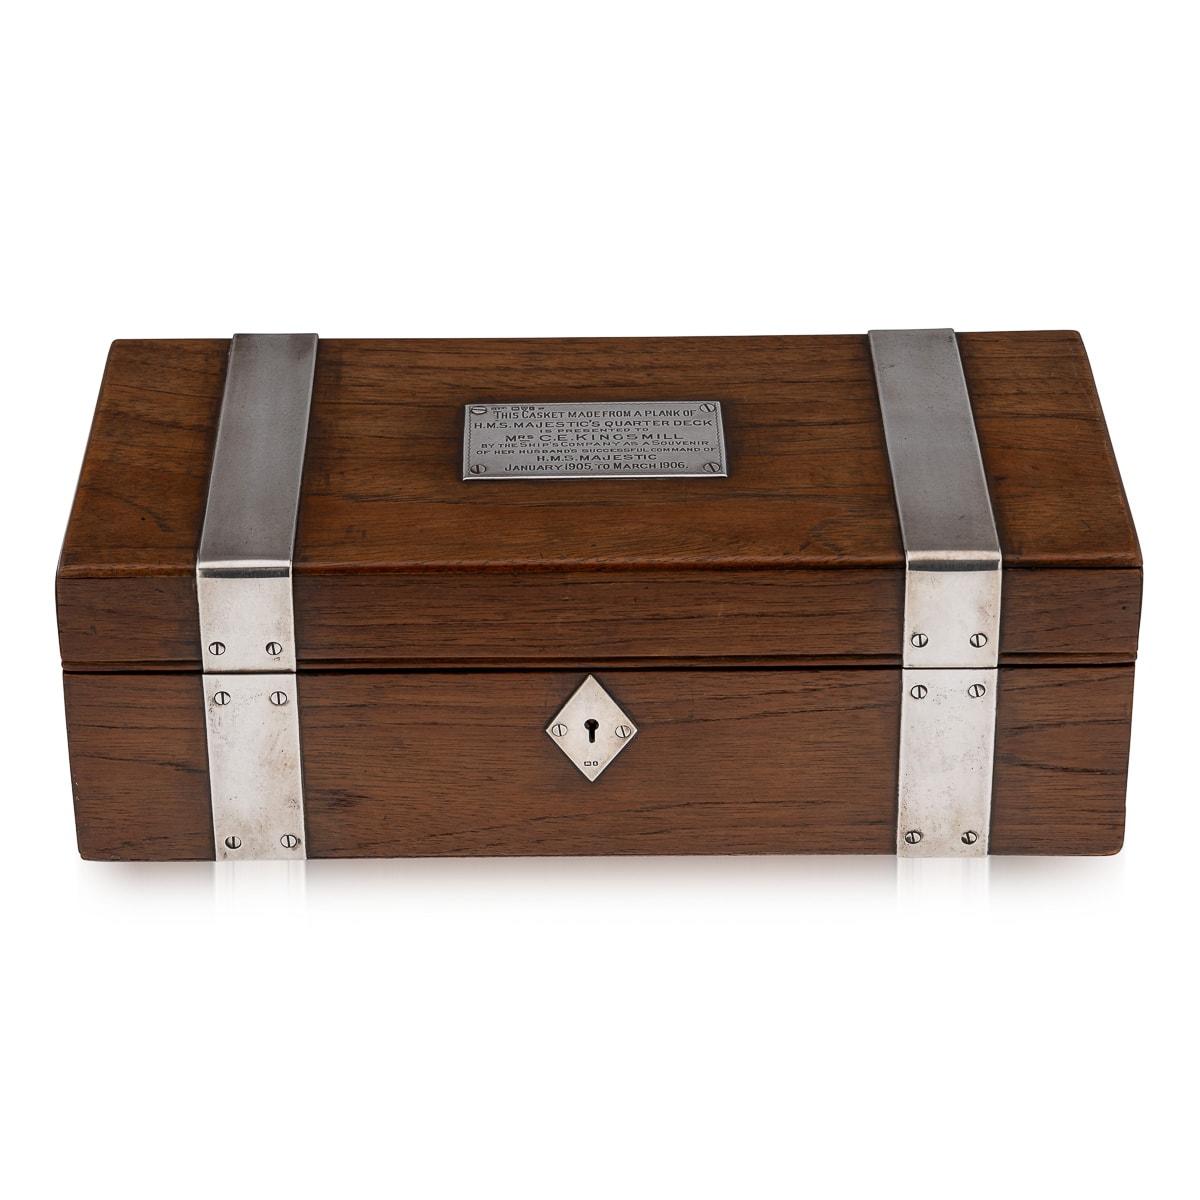 Antique early 20thC British solid silver & wood large presentation box, of very impressive size and heavy gauge, bound by two sterling silver straps and diamond shaped escutcheon. Hallmarked English silver (925 standard), Chester, year 1905 (E),